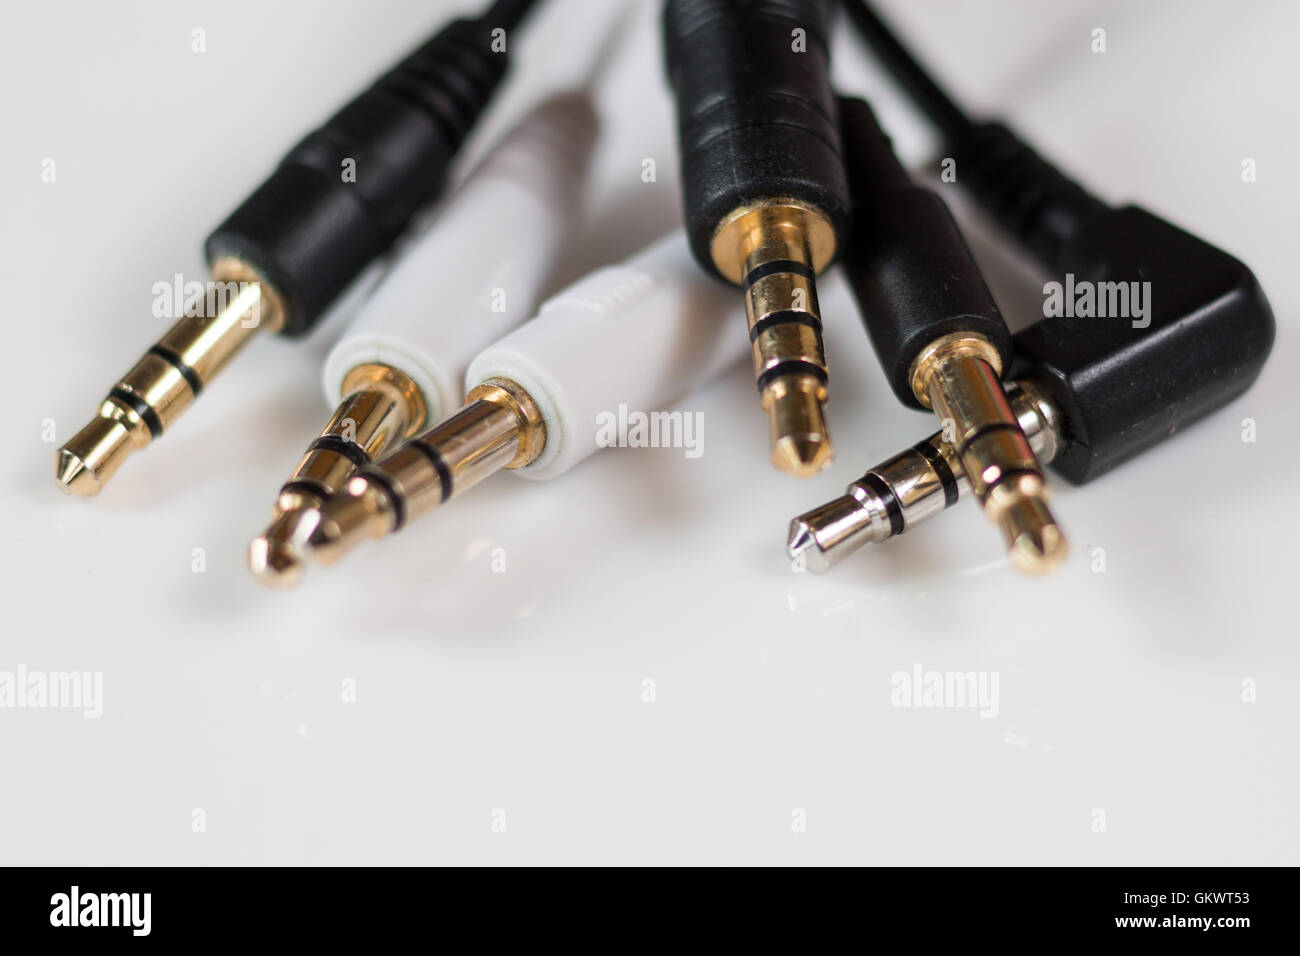 Group of audio leads showing the classic 3.5mm headphone plug Stock Photo